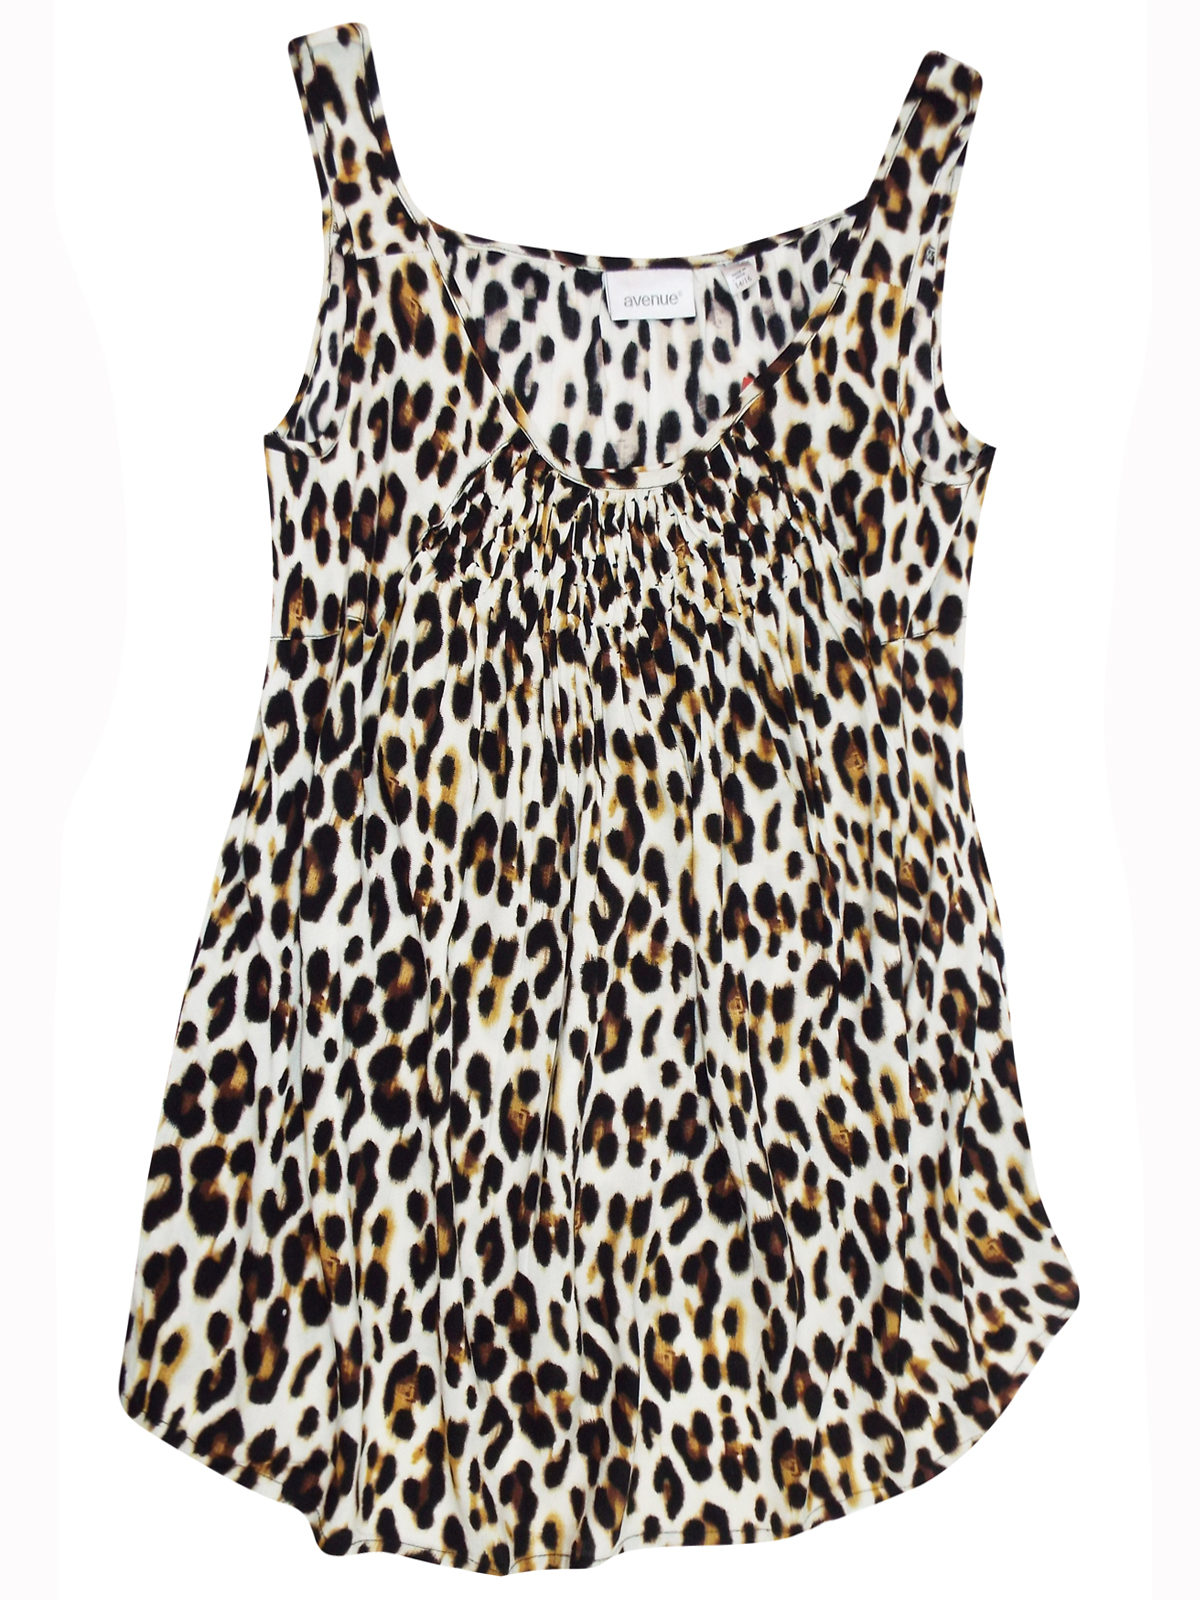 Avenue BROWN Animal Print Honeycomb Swing Top - Plus Size 16/18 to 32/34